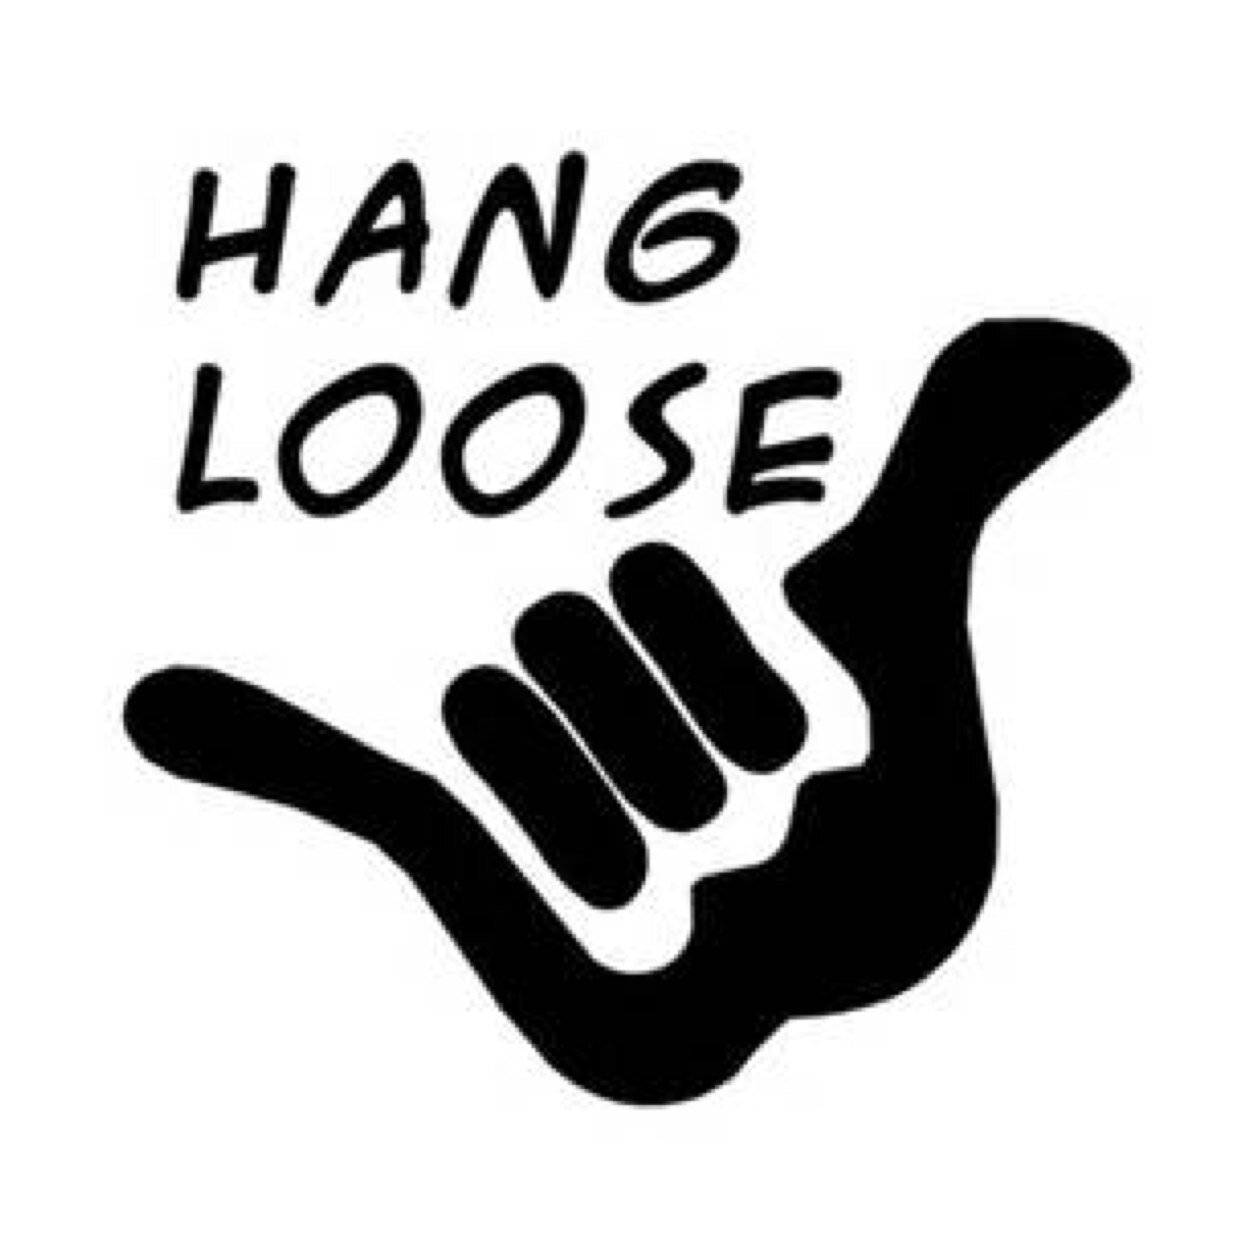 We are hang loose and we deliver what cannont be deliverd in the Dearbon Heights area hit us up if your craving taco bell or mcdonalds but have no ride.